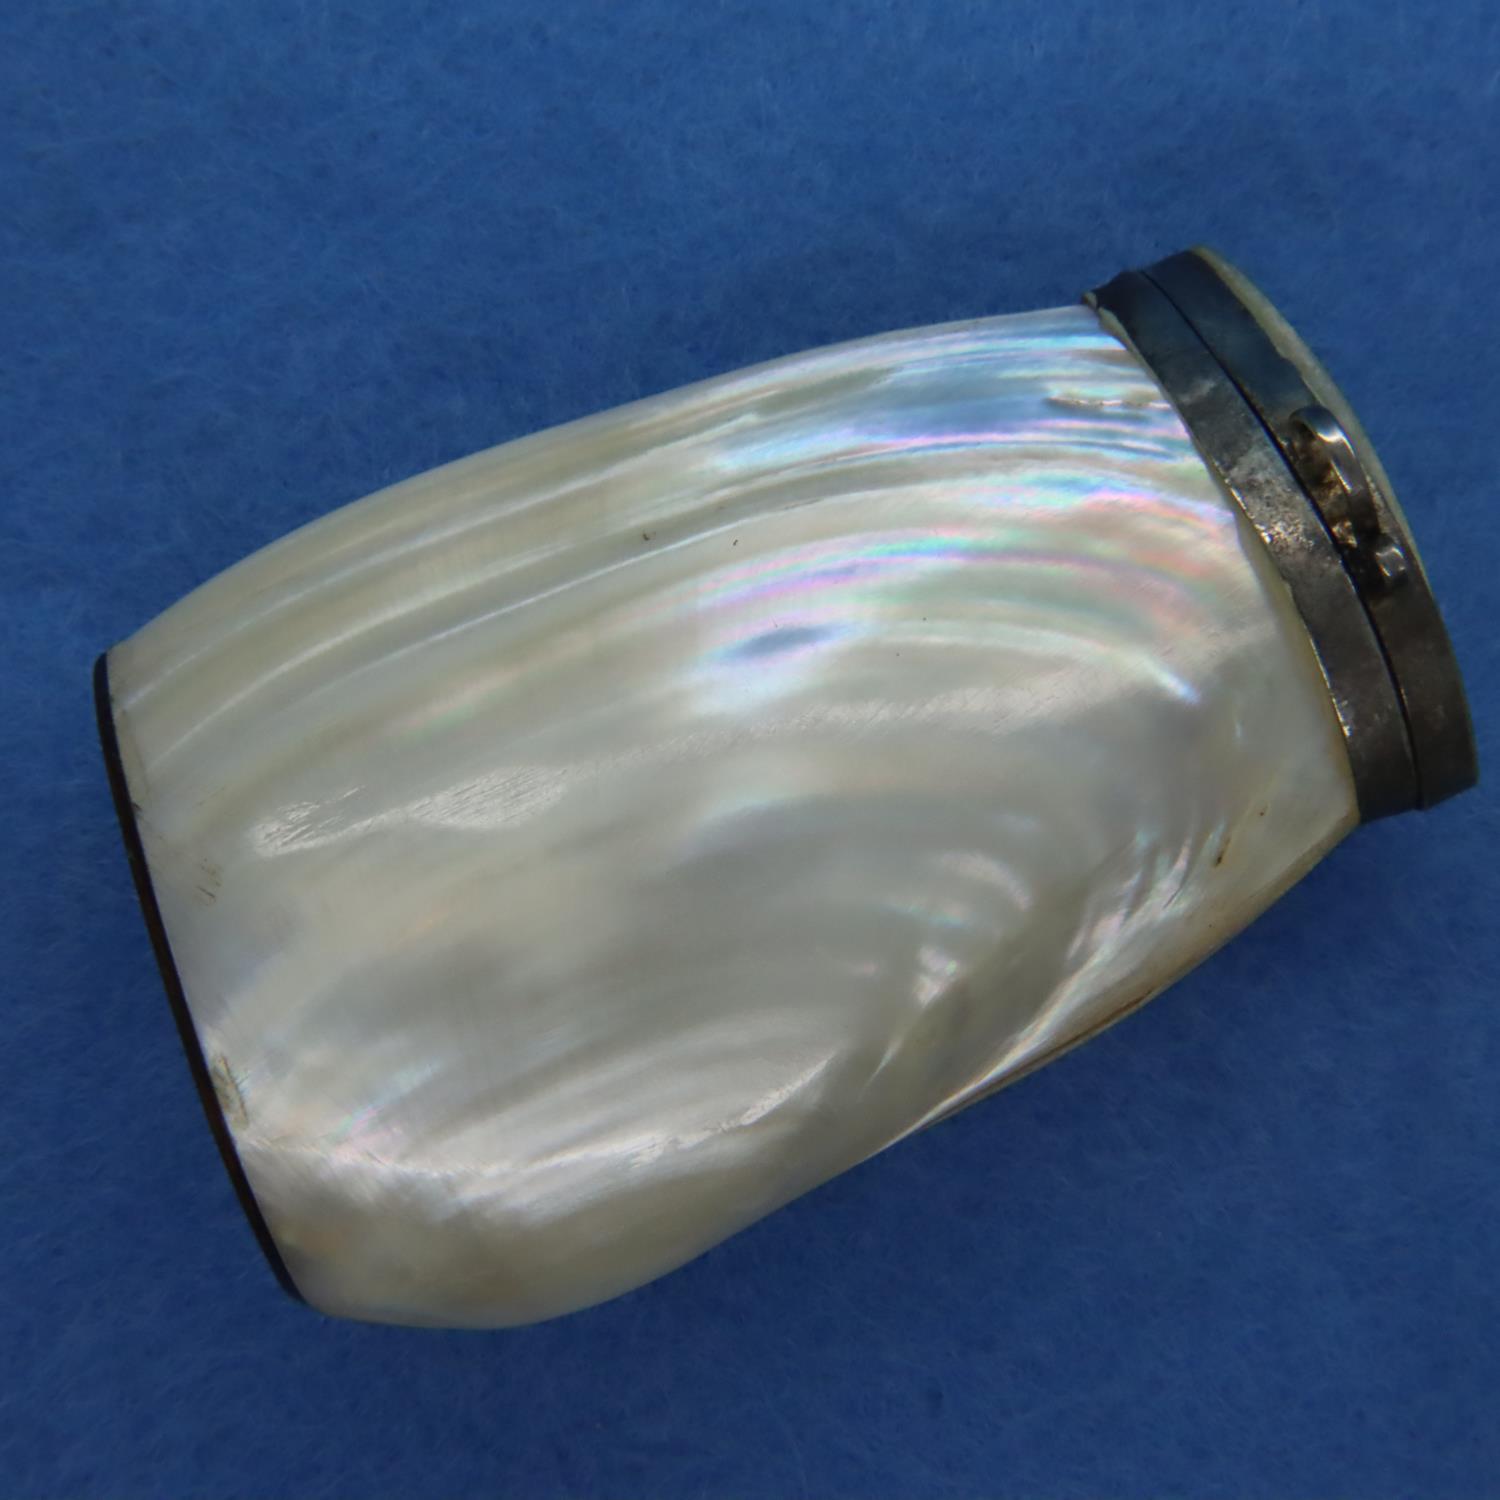 Mother of pearl lidded pot, H: 6 cm. P&P Group 1 (£14+VAT for the first lot and £1+VAT for - Image 4 of 4